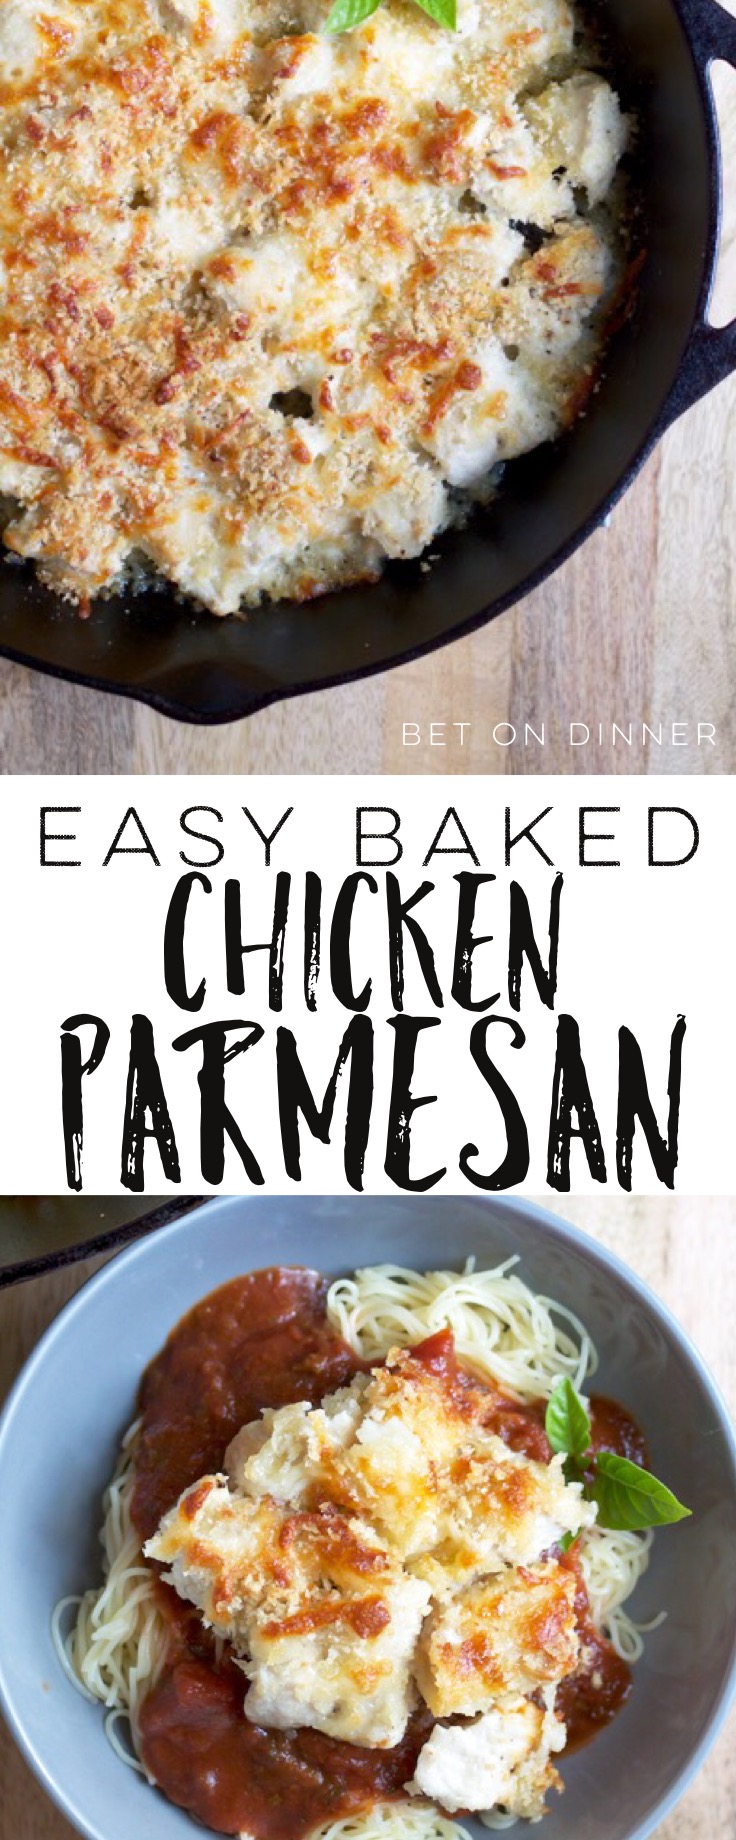 Easy baked chicken parmesan features seared bite-sized pieces of chicken covered with a bread crumbs and cheese topping! So crispy...so cheesy...so easy!